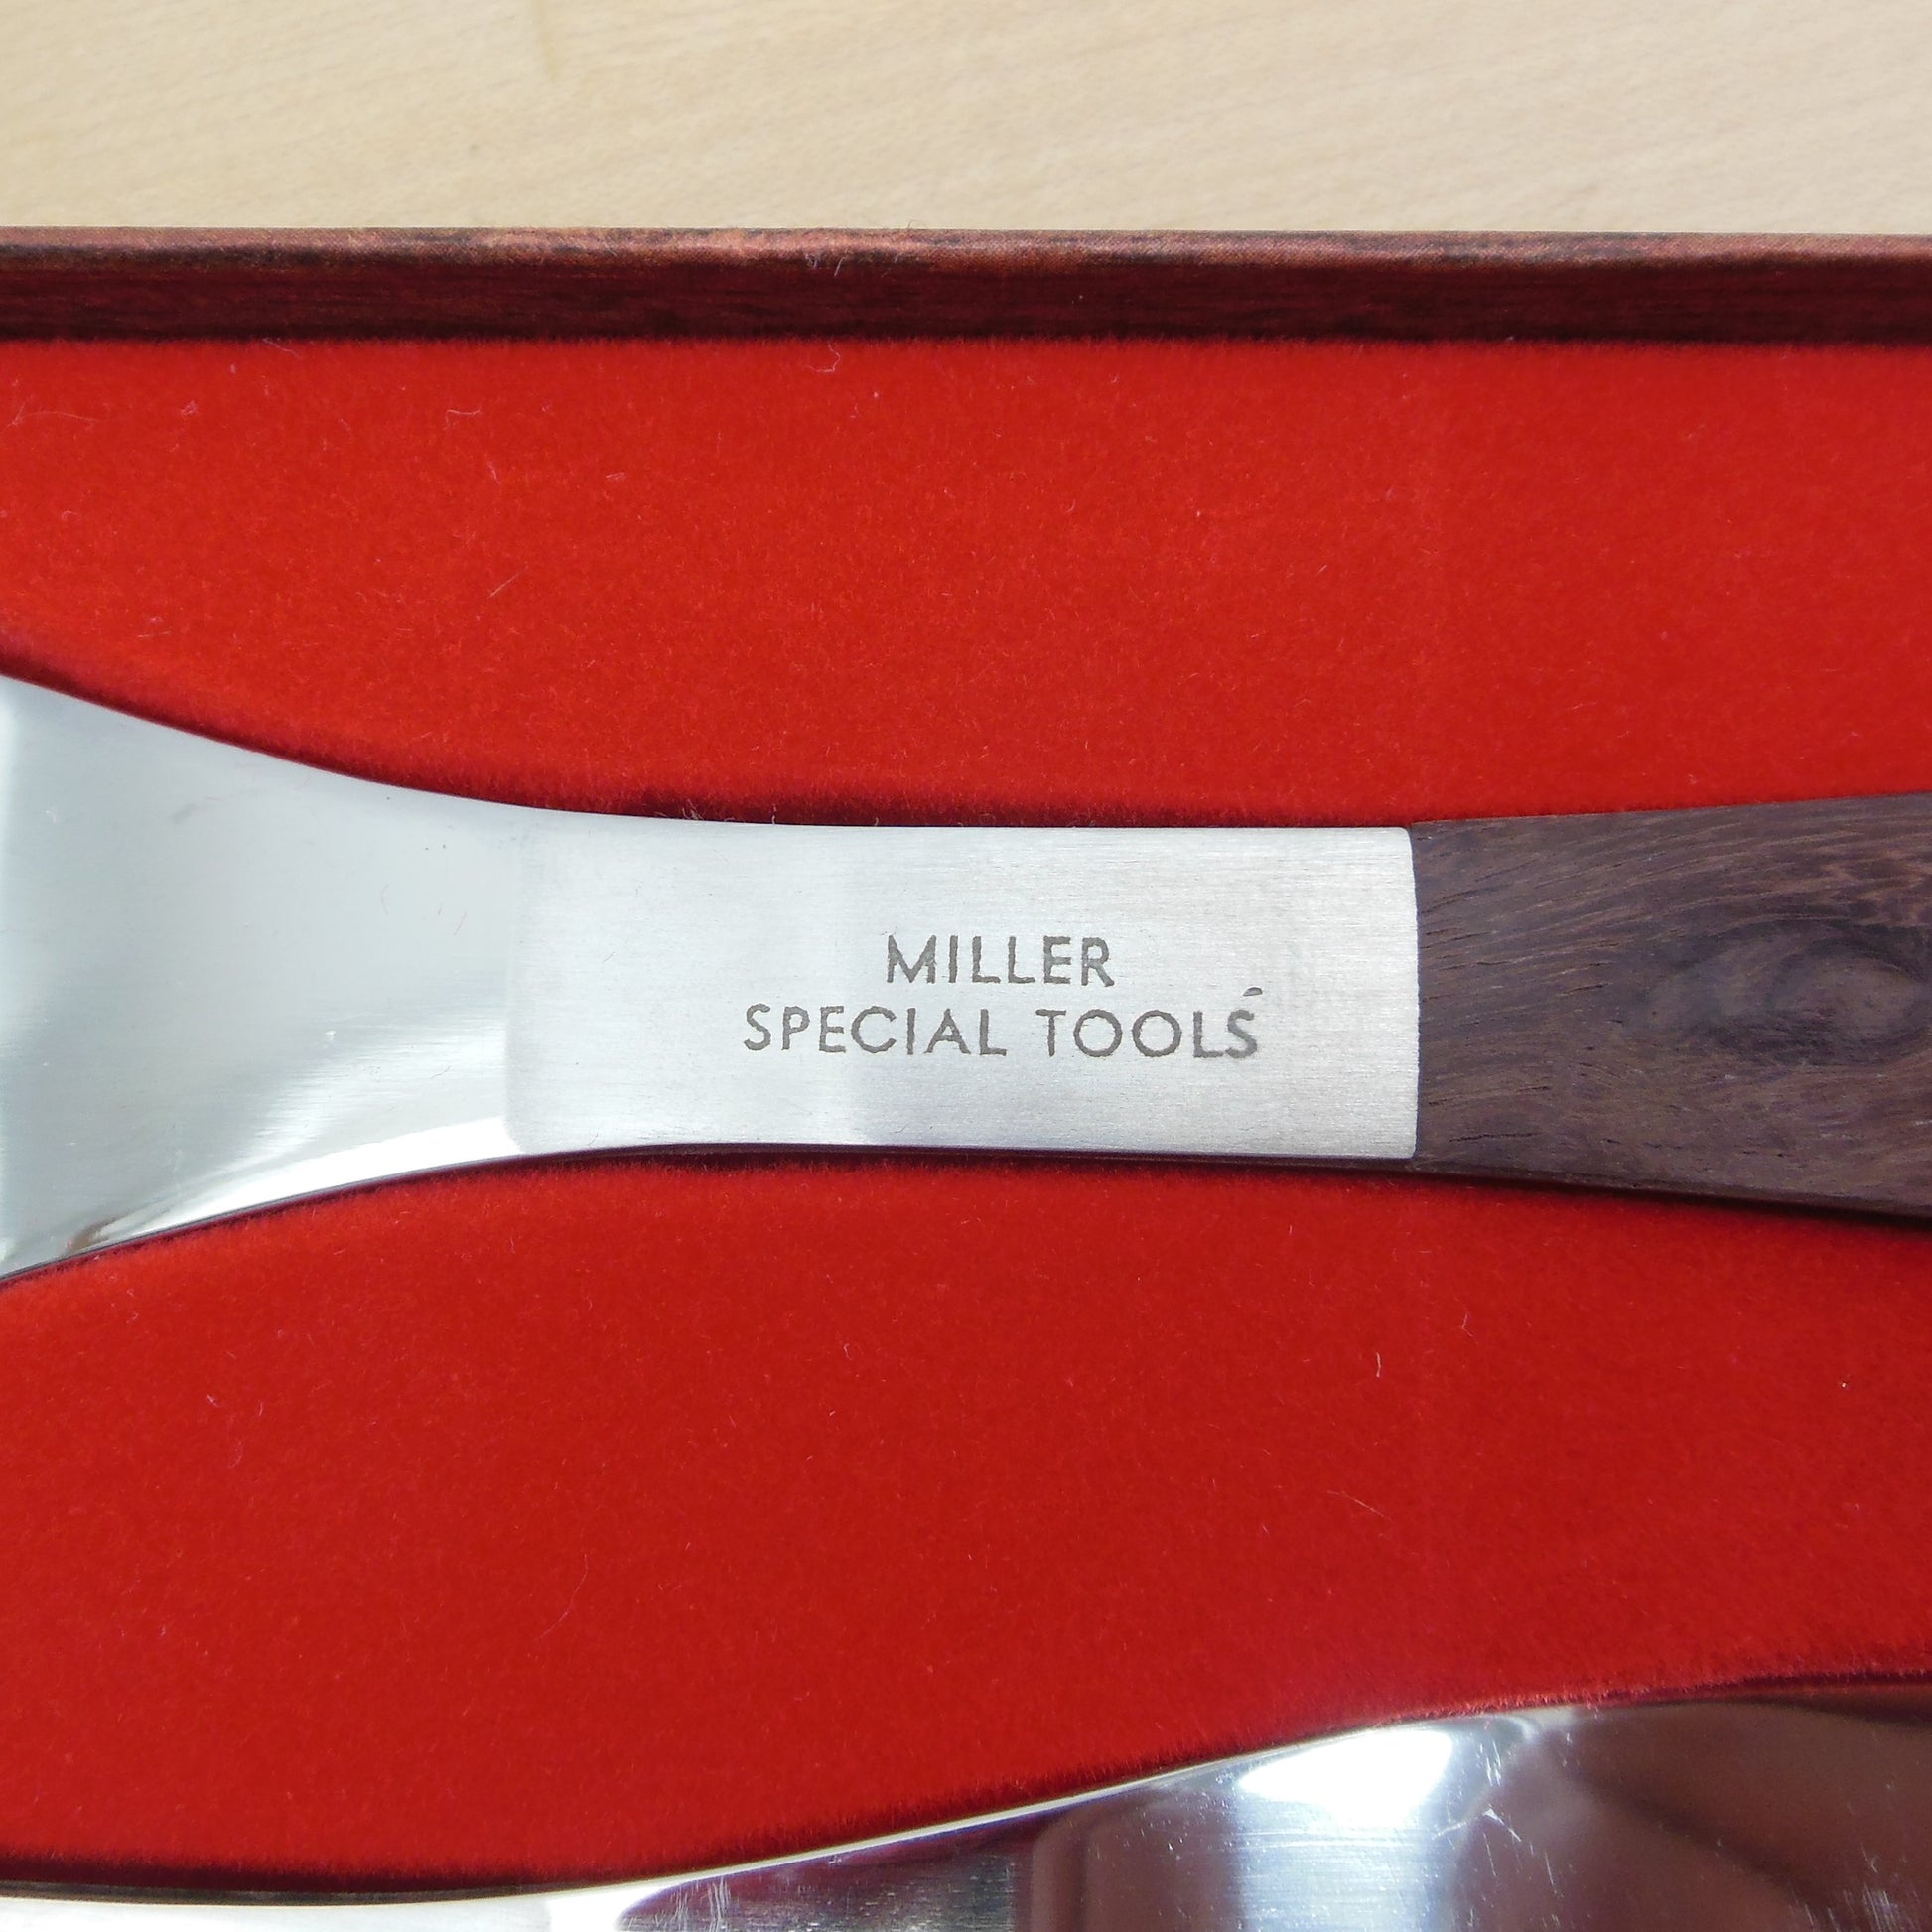 Burnco Miller Special Tool Promotional Salad Servers & Cheese Pizza Cutter Stainless Steel Rosewood